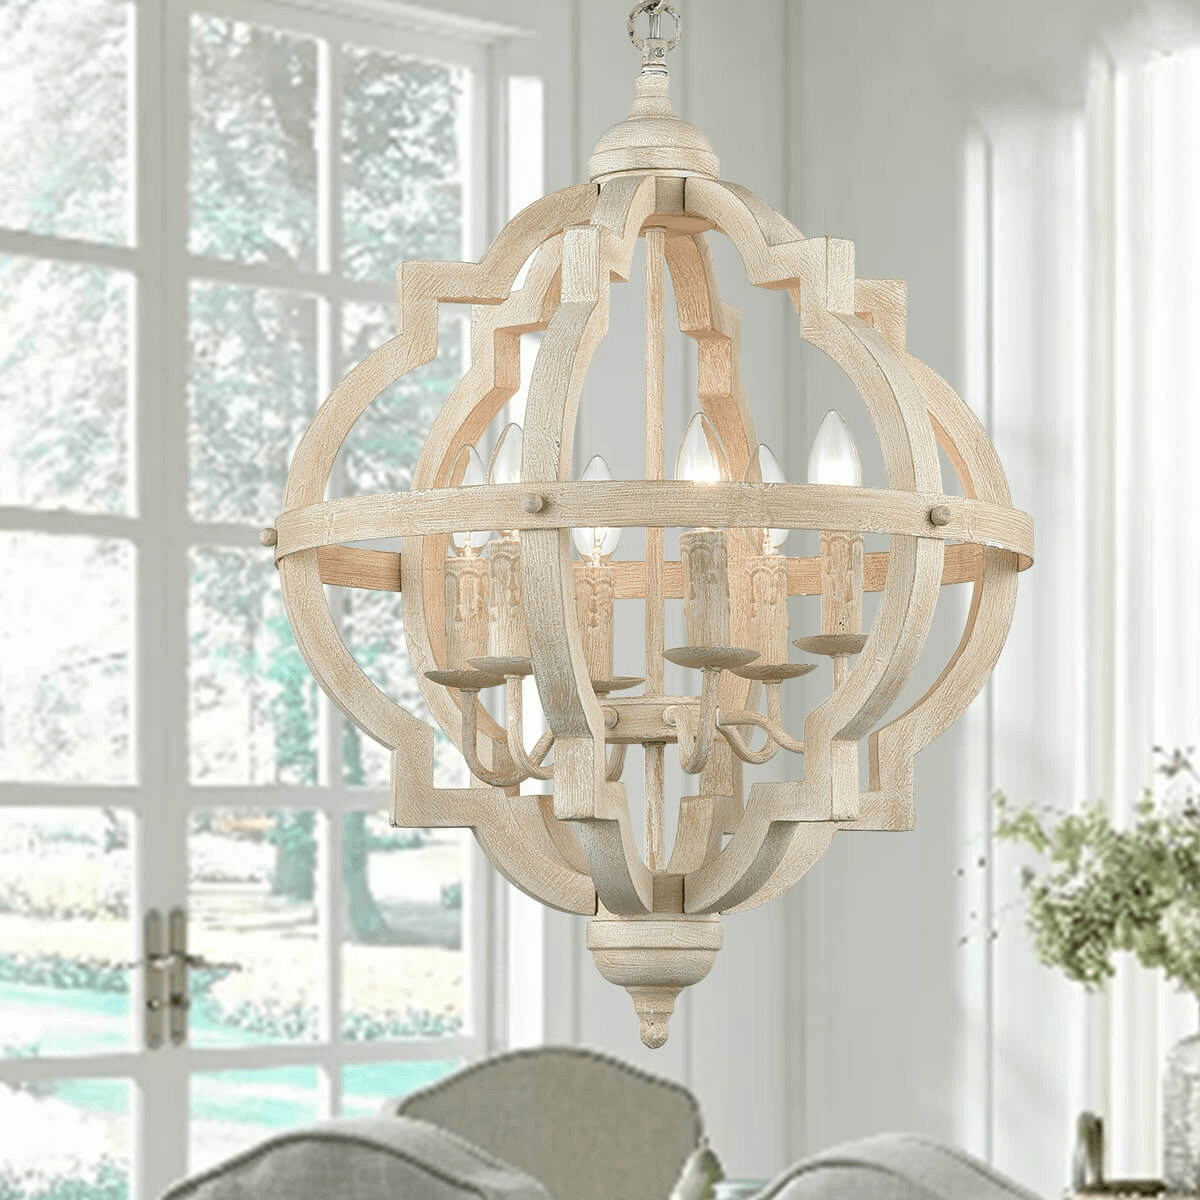 Distressed Off-white Wooden Sphere Chandelier